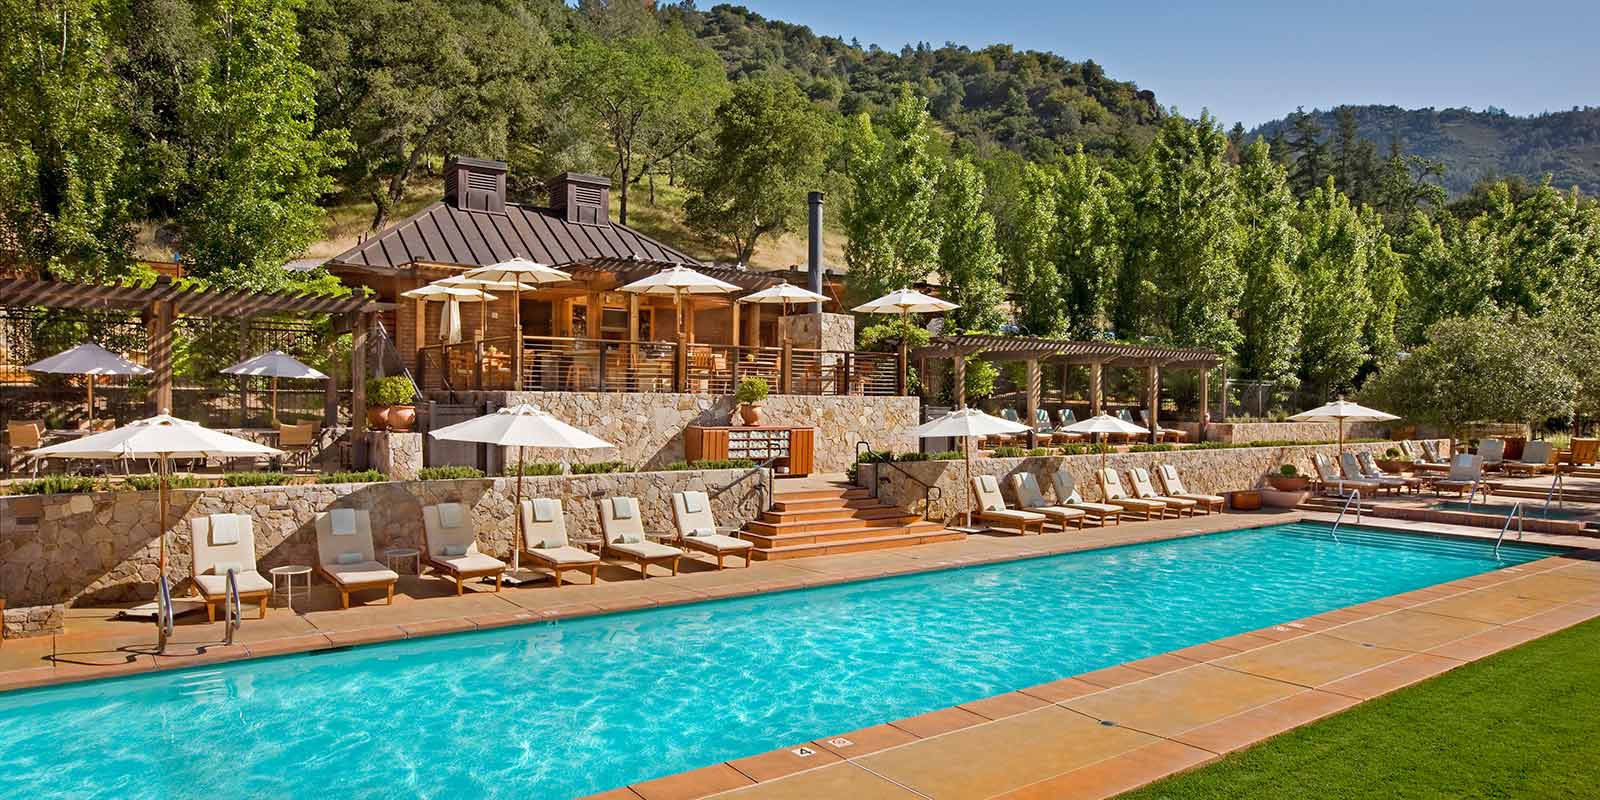  Calistoga Ranch, An Auberge Resort: best hotels in usa